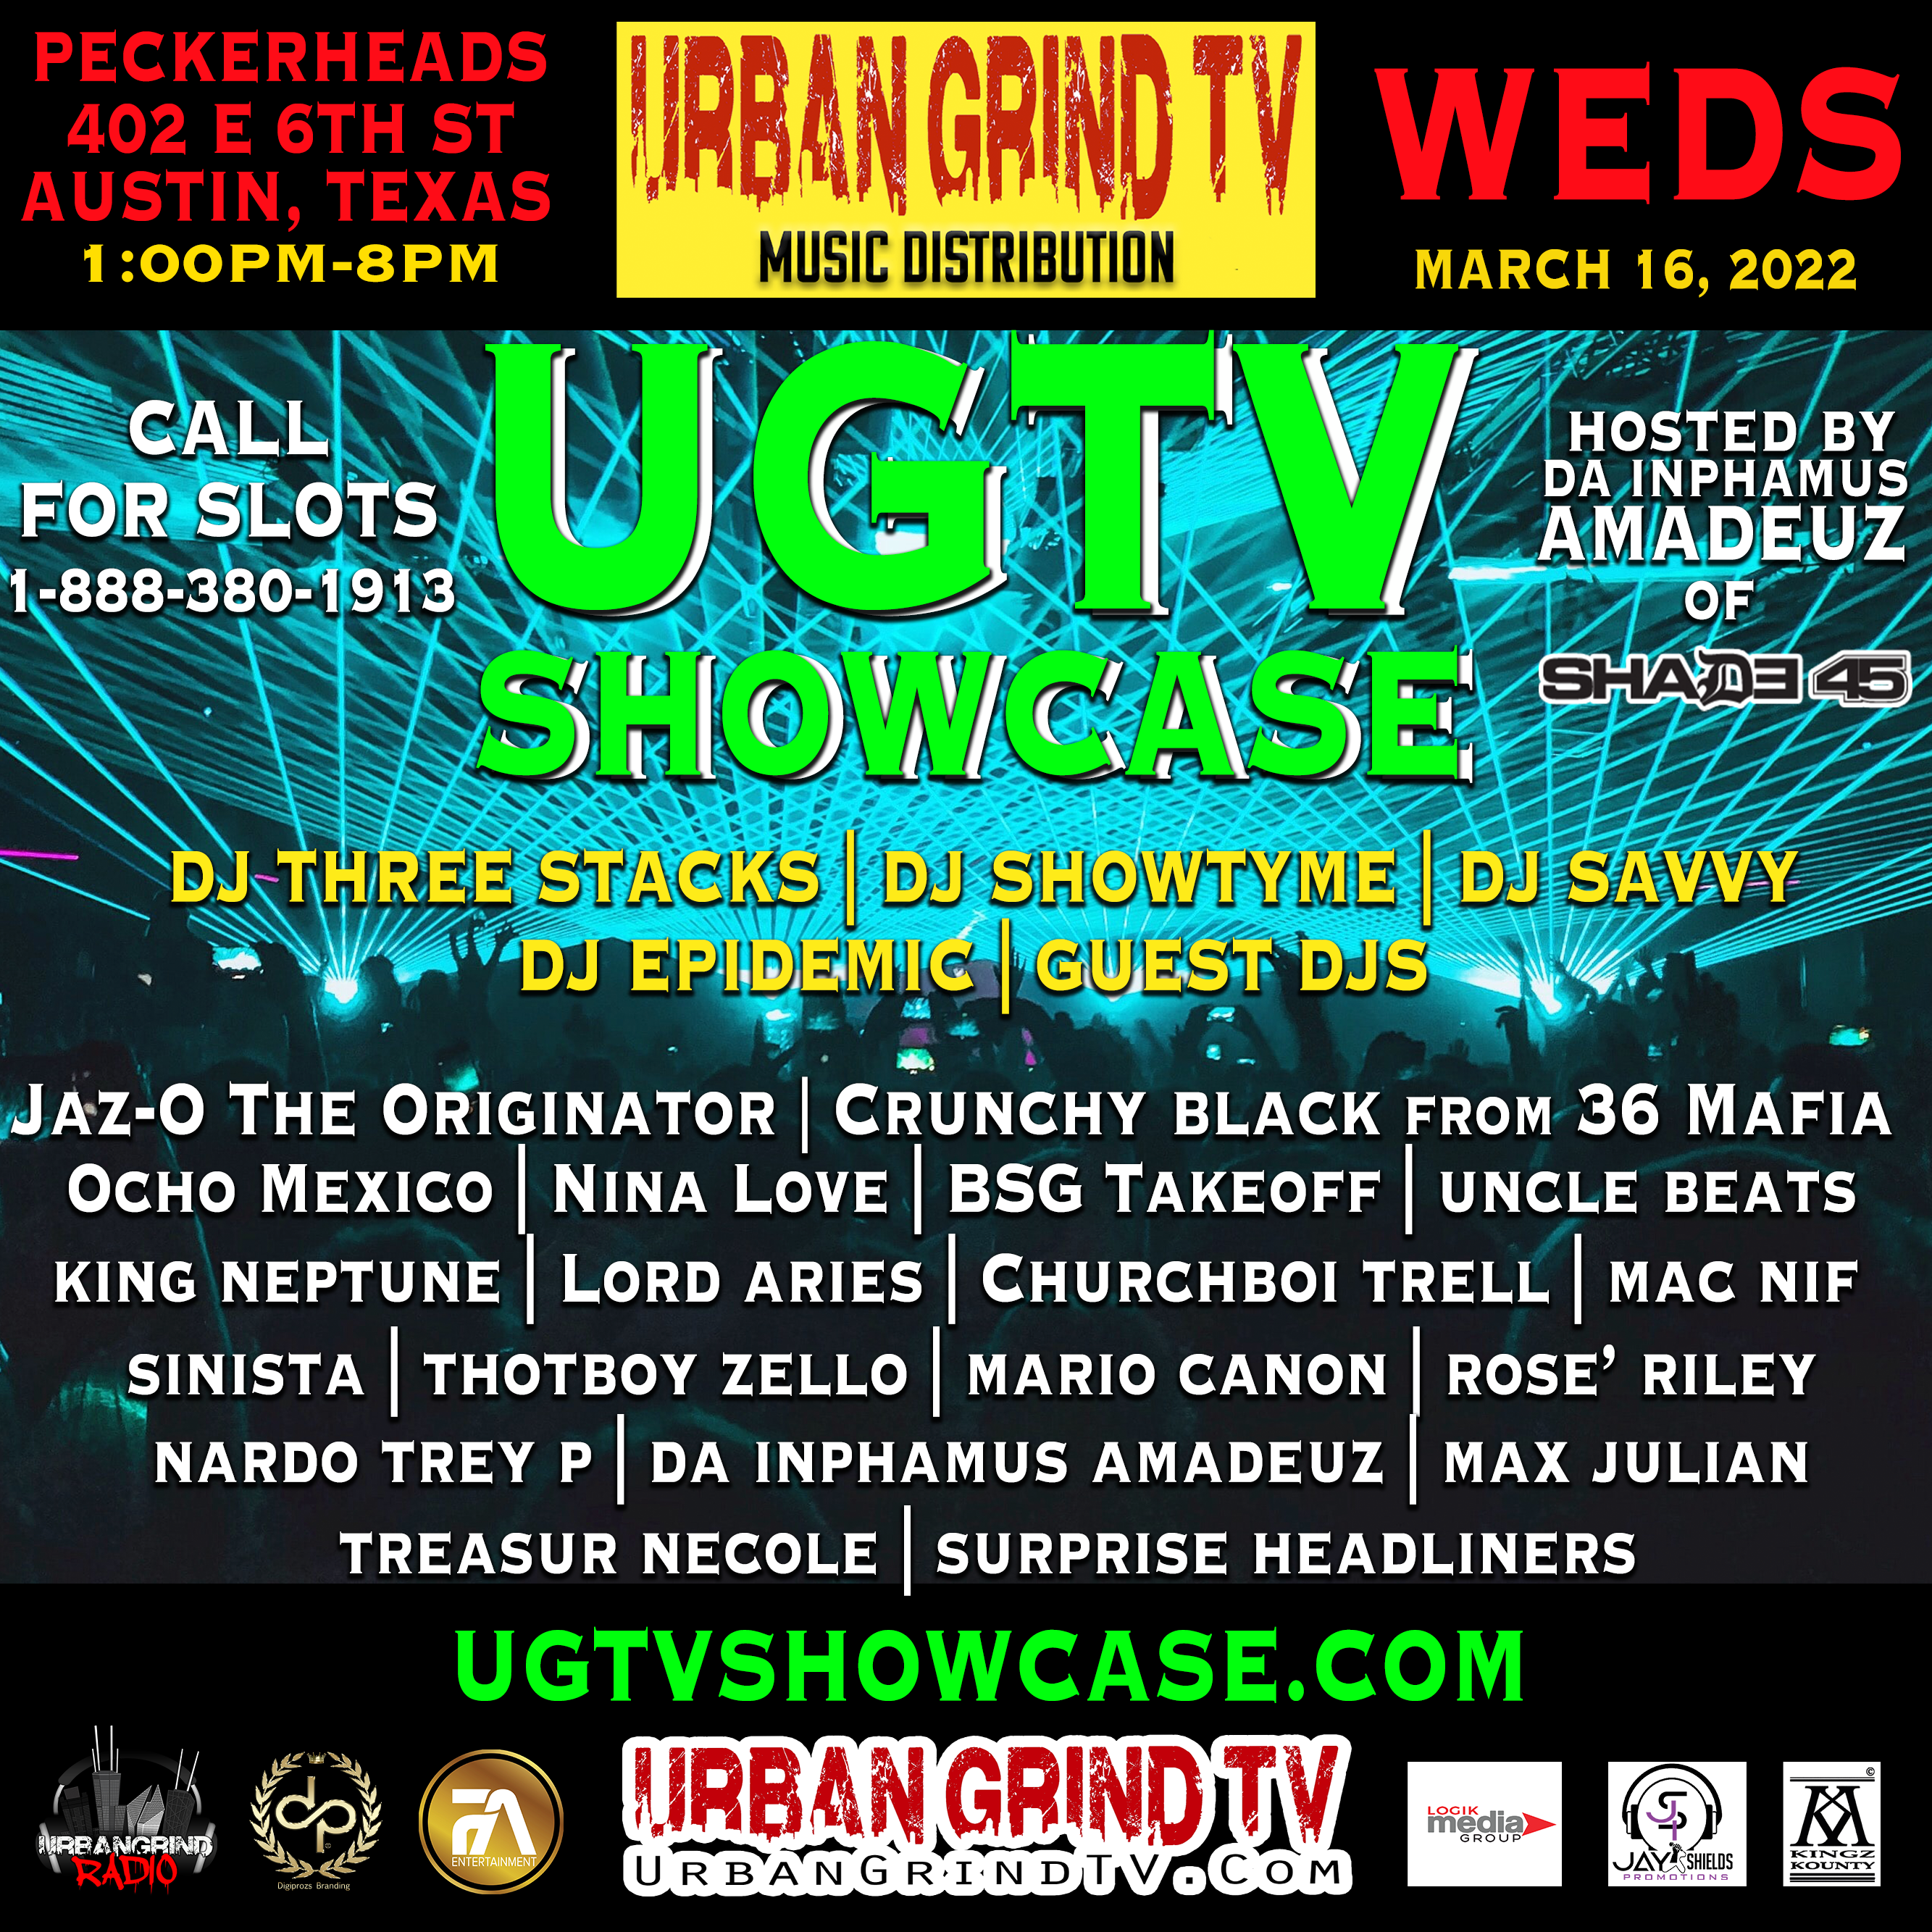 UGTV SHOWCASE LINEUP FOR AUSTIN DURING SXSW MARCH 16 & SLOTS AVAILABLE